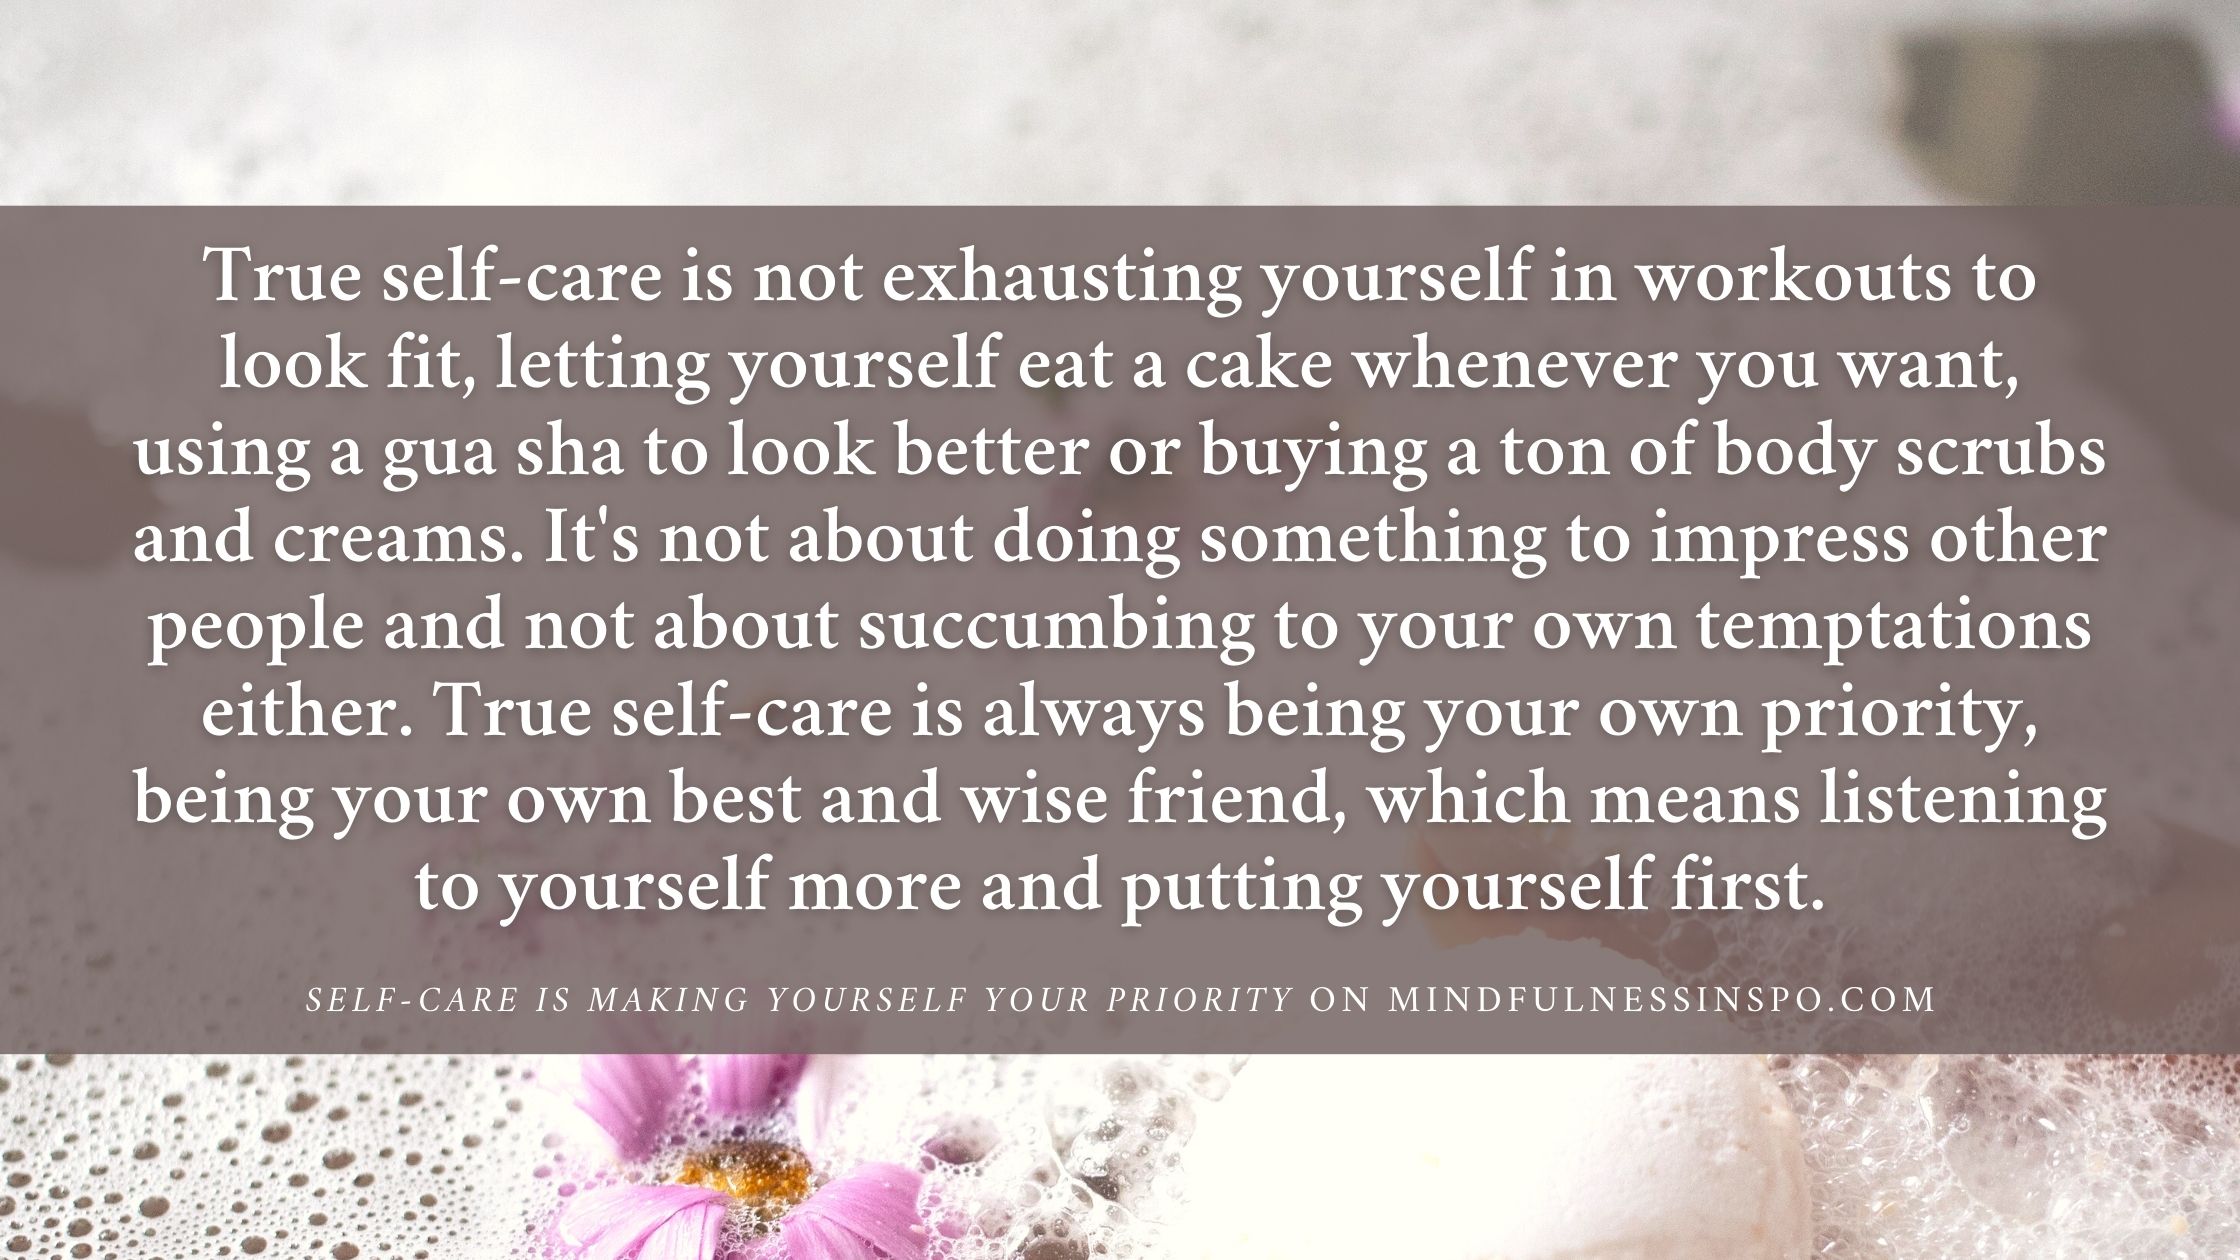 what is self-care quotes: true self-care is not exhausting yourself in workouts to look fit, letting yourself eat a cake whenever you want, using a gua sha to look better or buying a ton of body scrubs and creams. It's not about doing something to impress other people and not about succumbing to your own temptations either. True self-care is always being your own priority, being your own best and wise friend, which means listening to yourself more and putting yourself first. from self-care is making yourself your priority on mindfulnessinspo.com